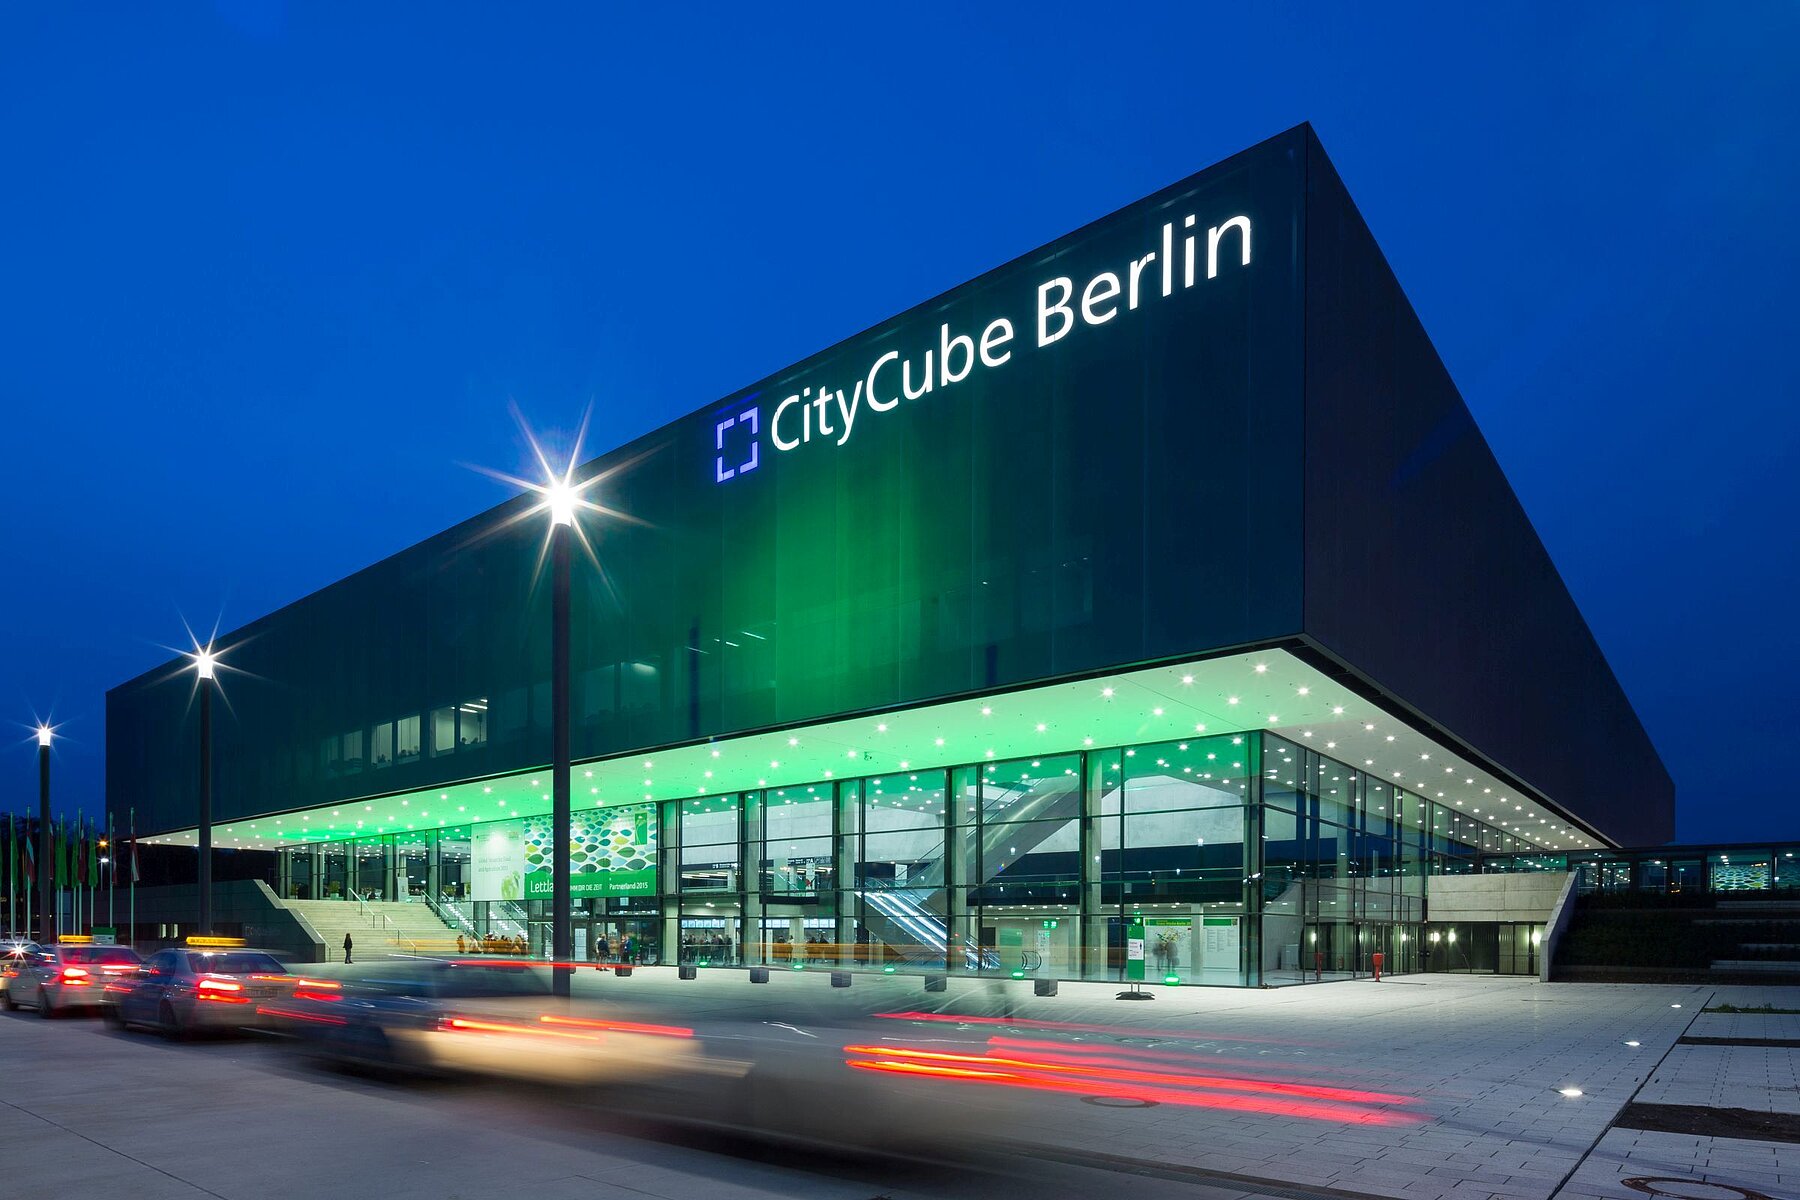 The City Cube Berlin, illuminated in green at night. Cabs are parked in front of the building.